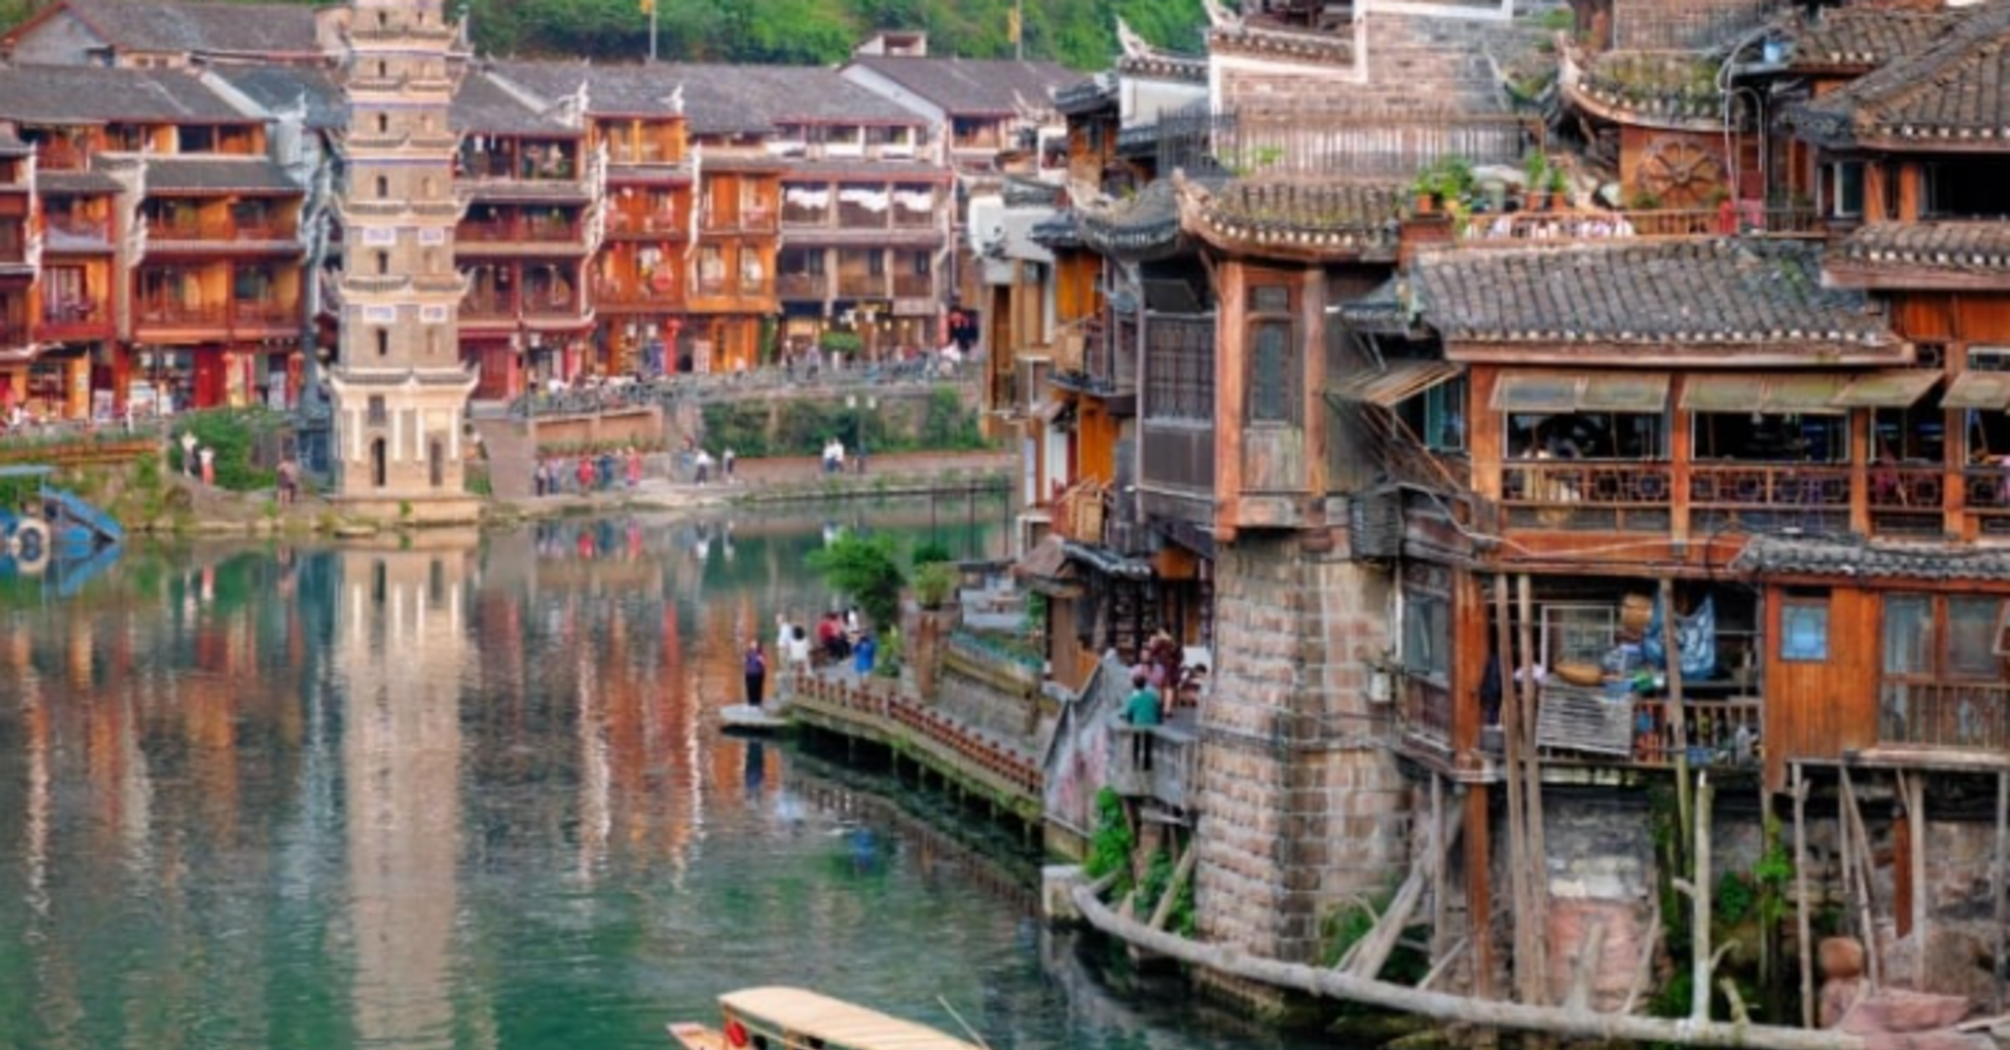 Top 10 picturesque lakeside cities in Asia